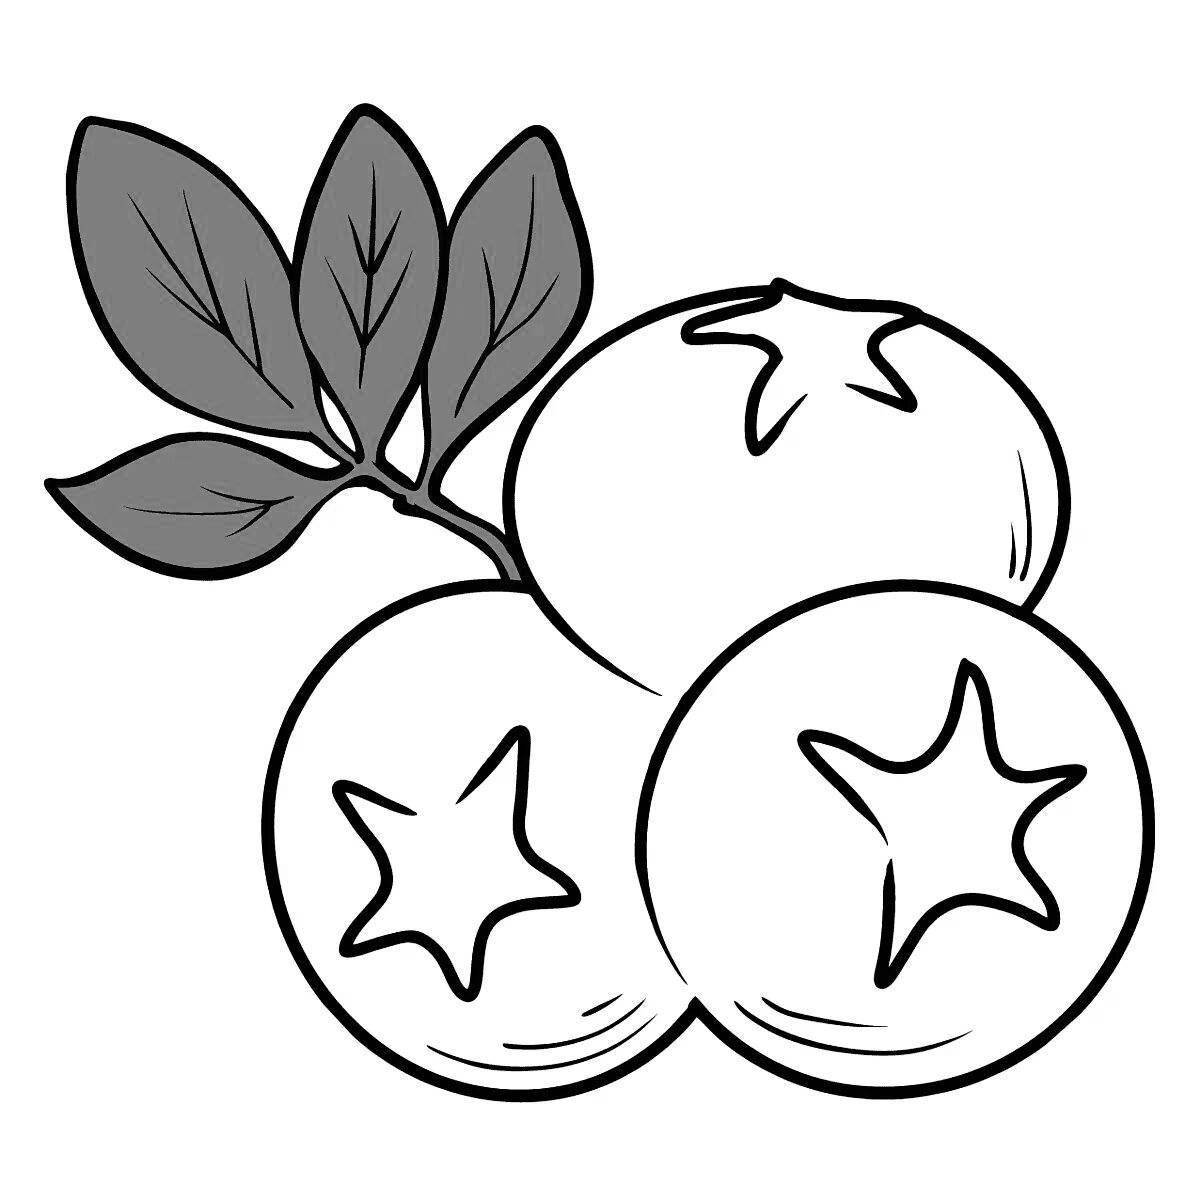 Sunny blueberry coloring page